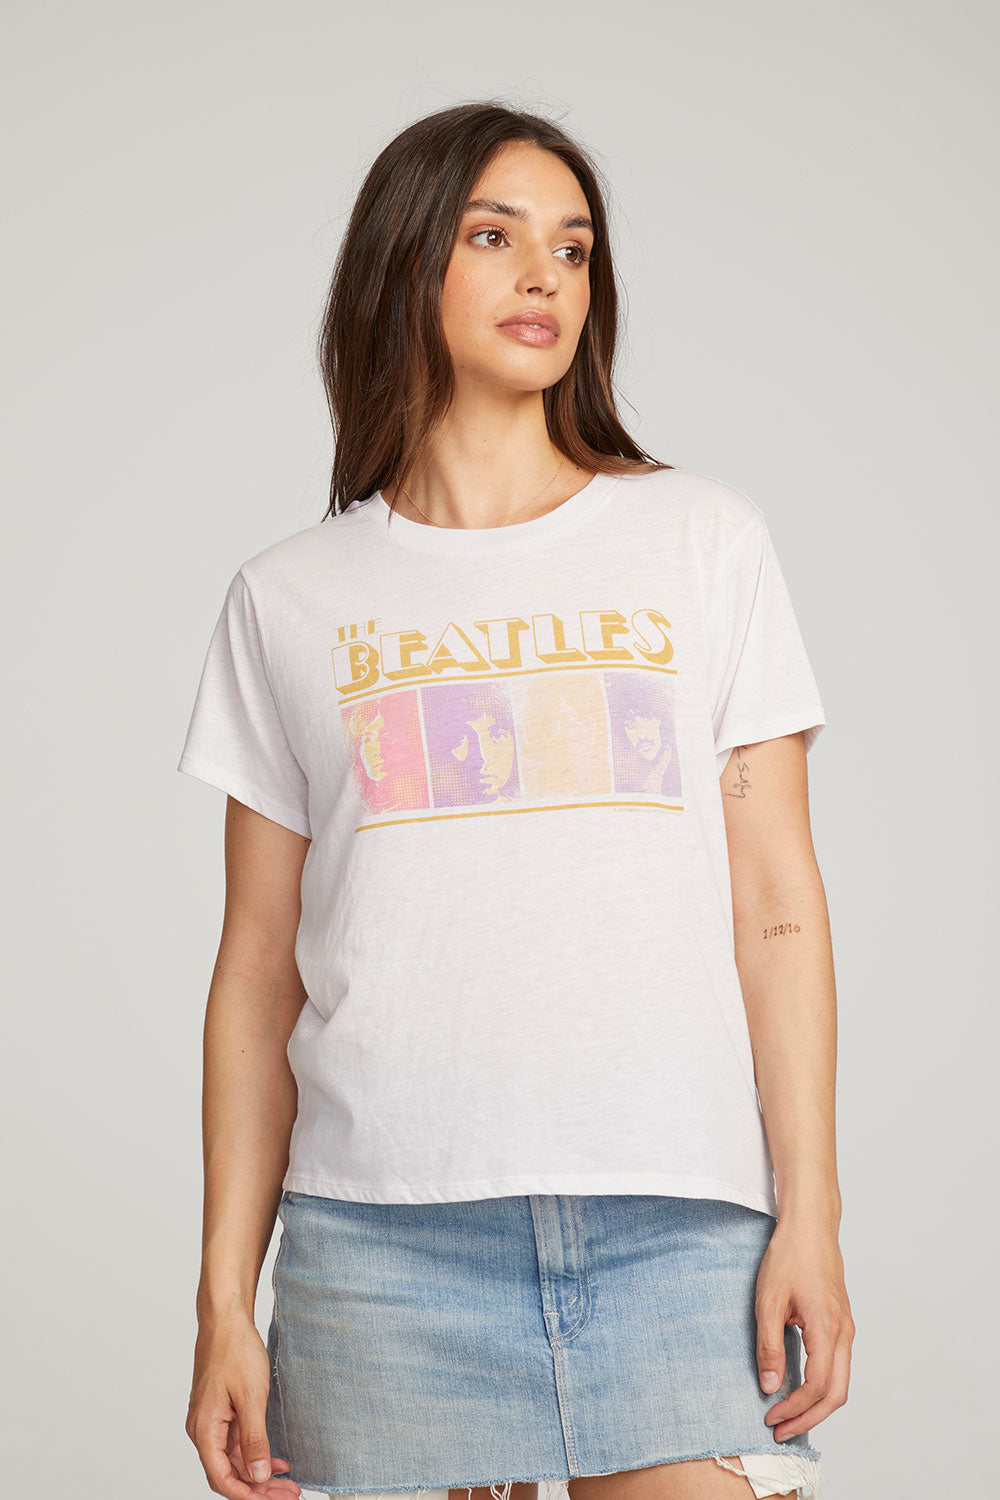 The Beatles Retro Beatles Tee WOMENS chaserbrand